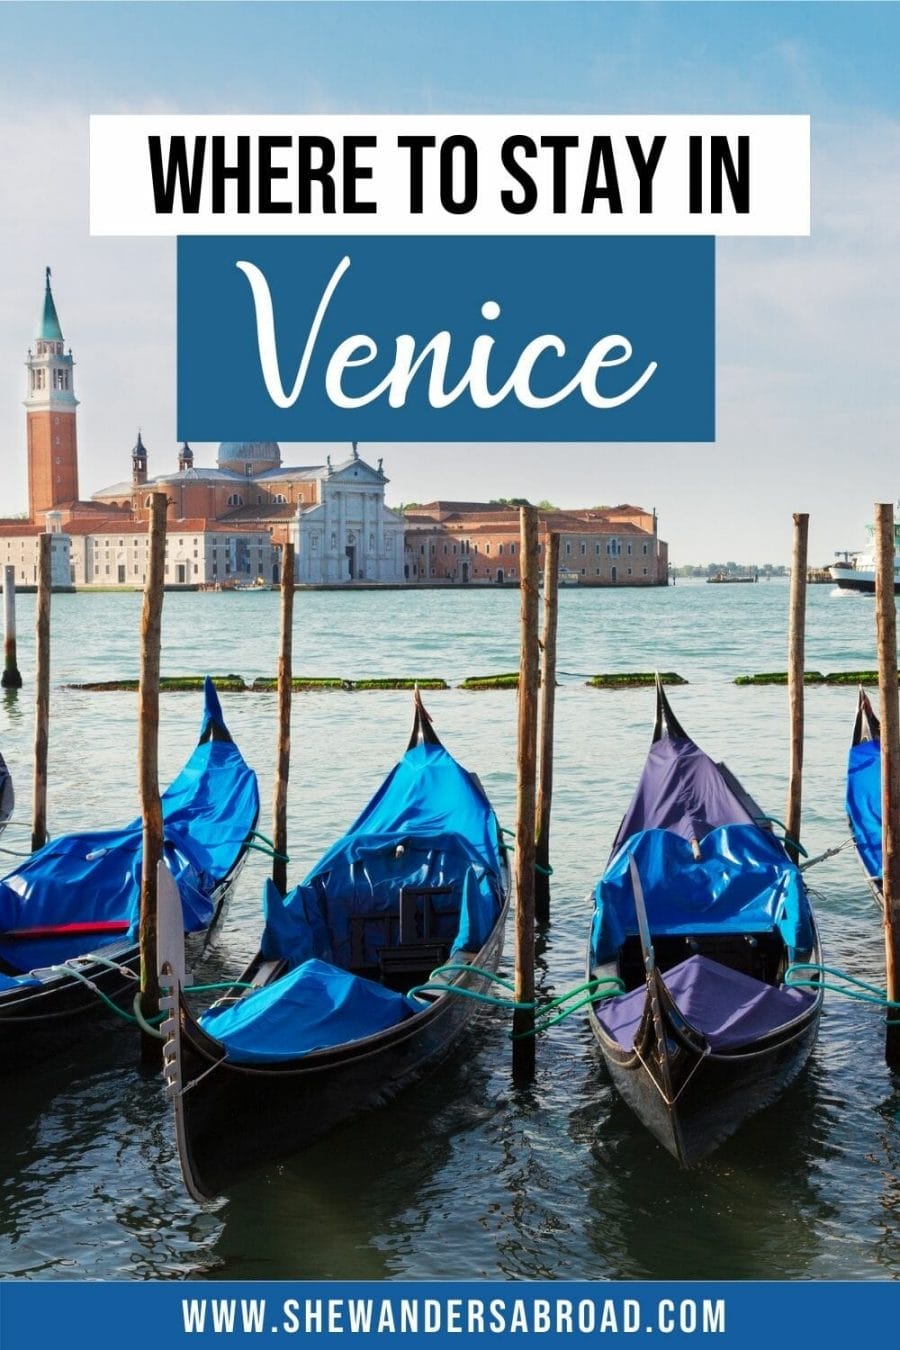 Best Areas to Stay in Venice, Italy